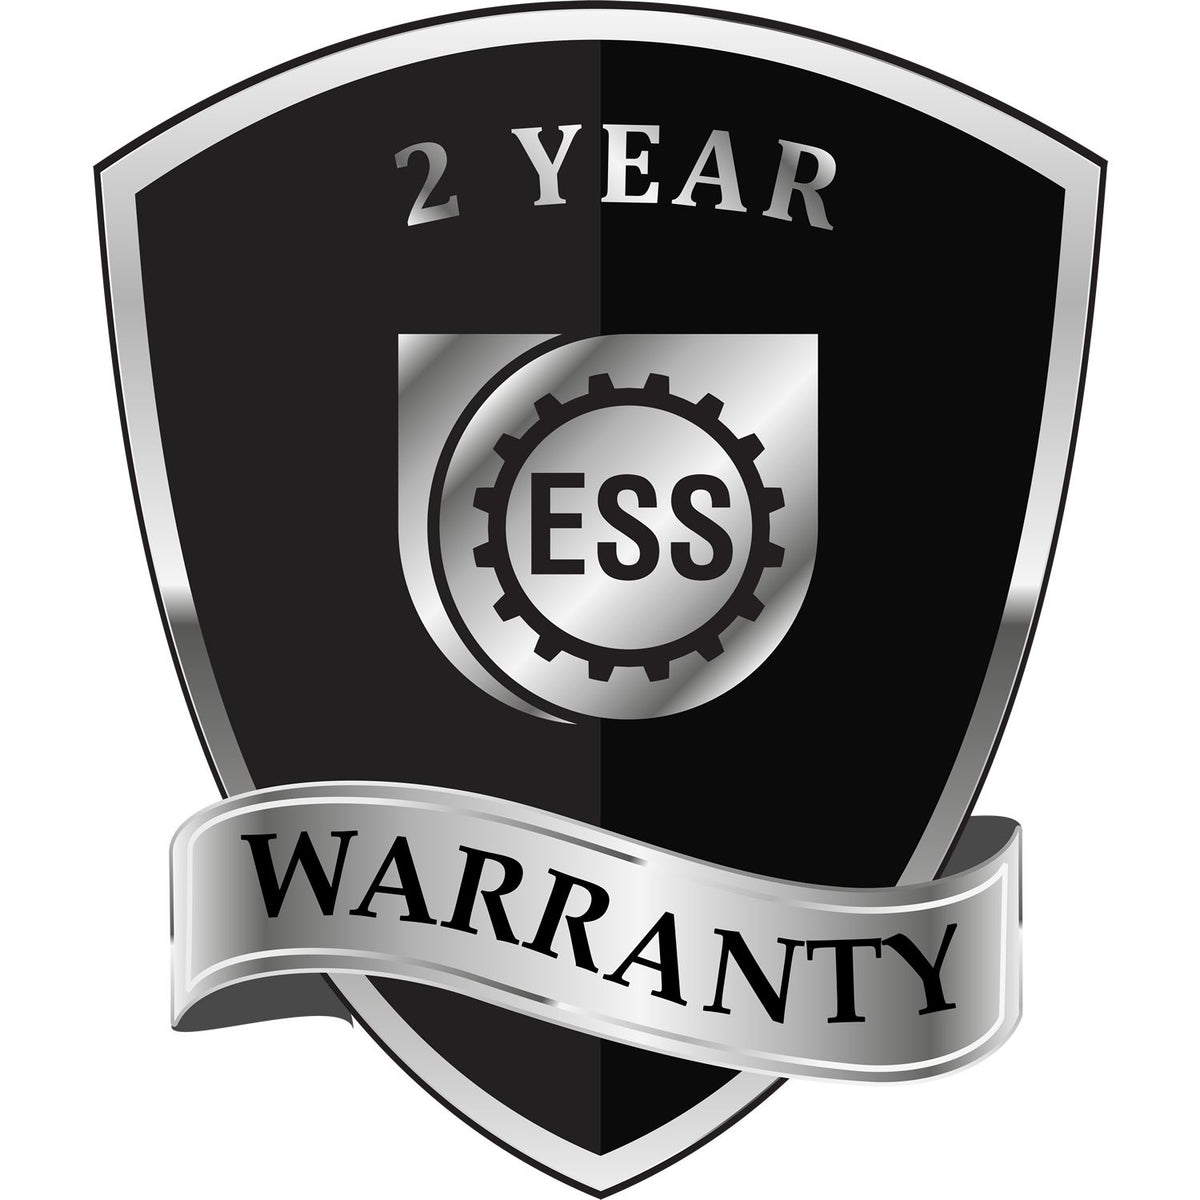 A black and silver badge or emblem showing warranty information for the Gift New Jersey Geologist Seal